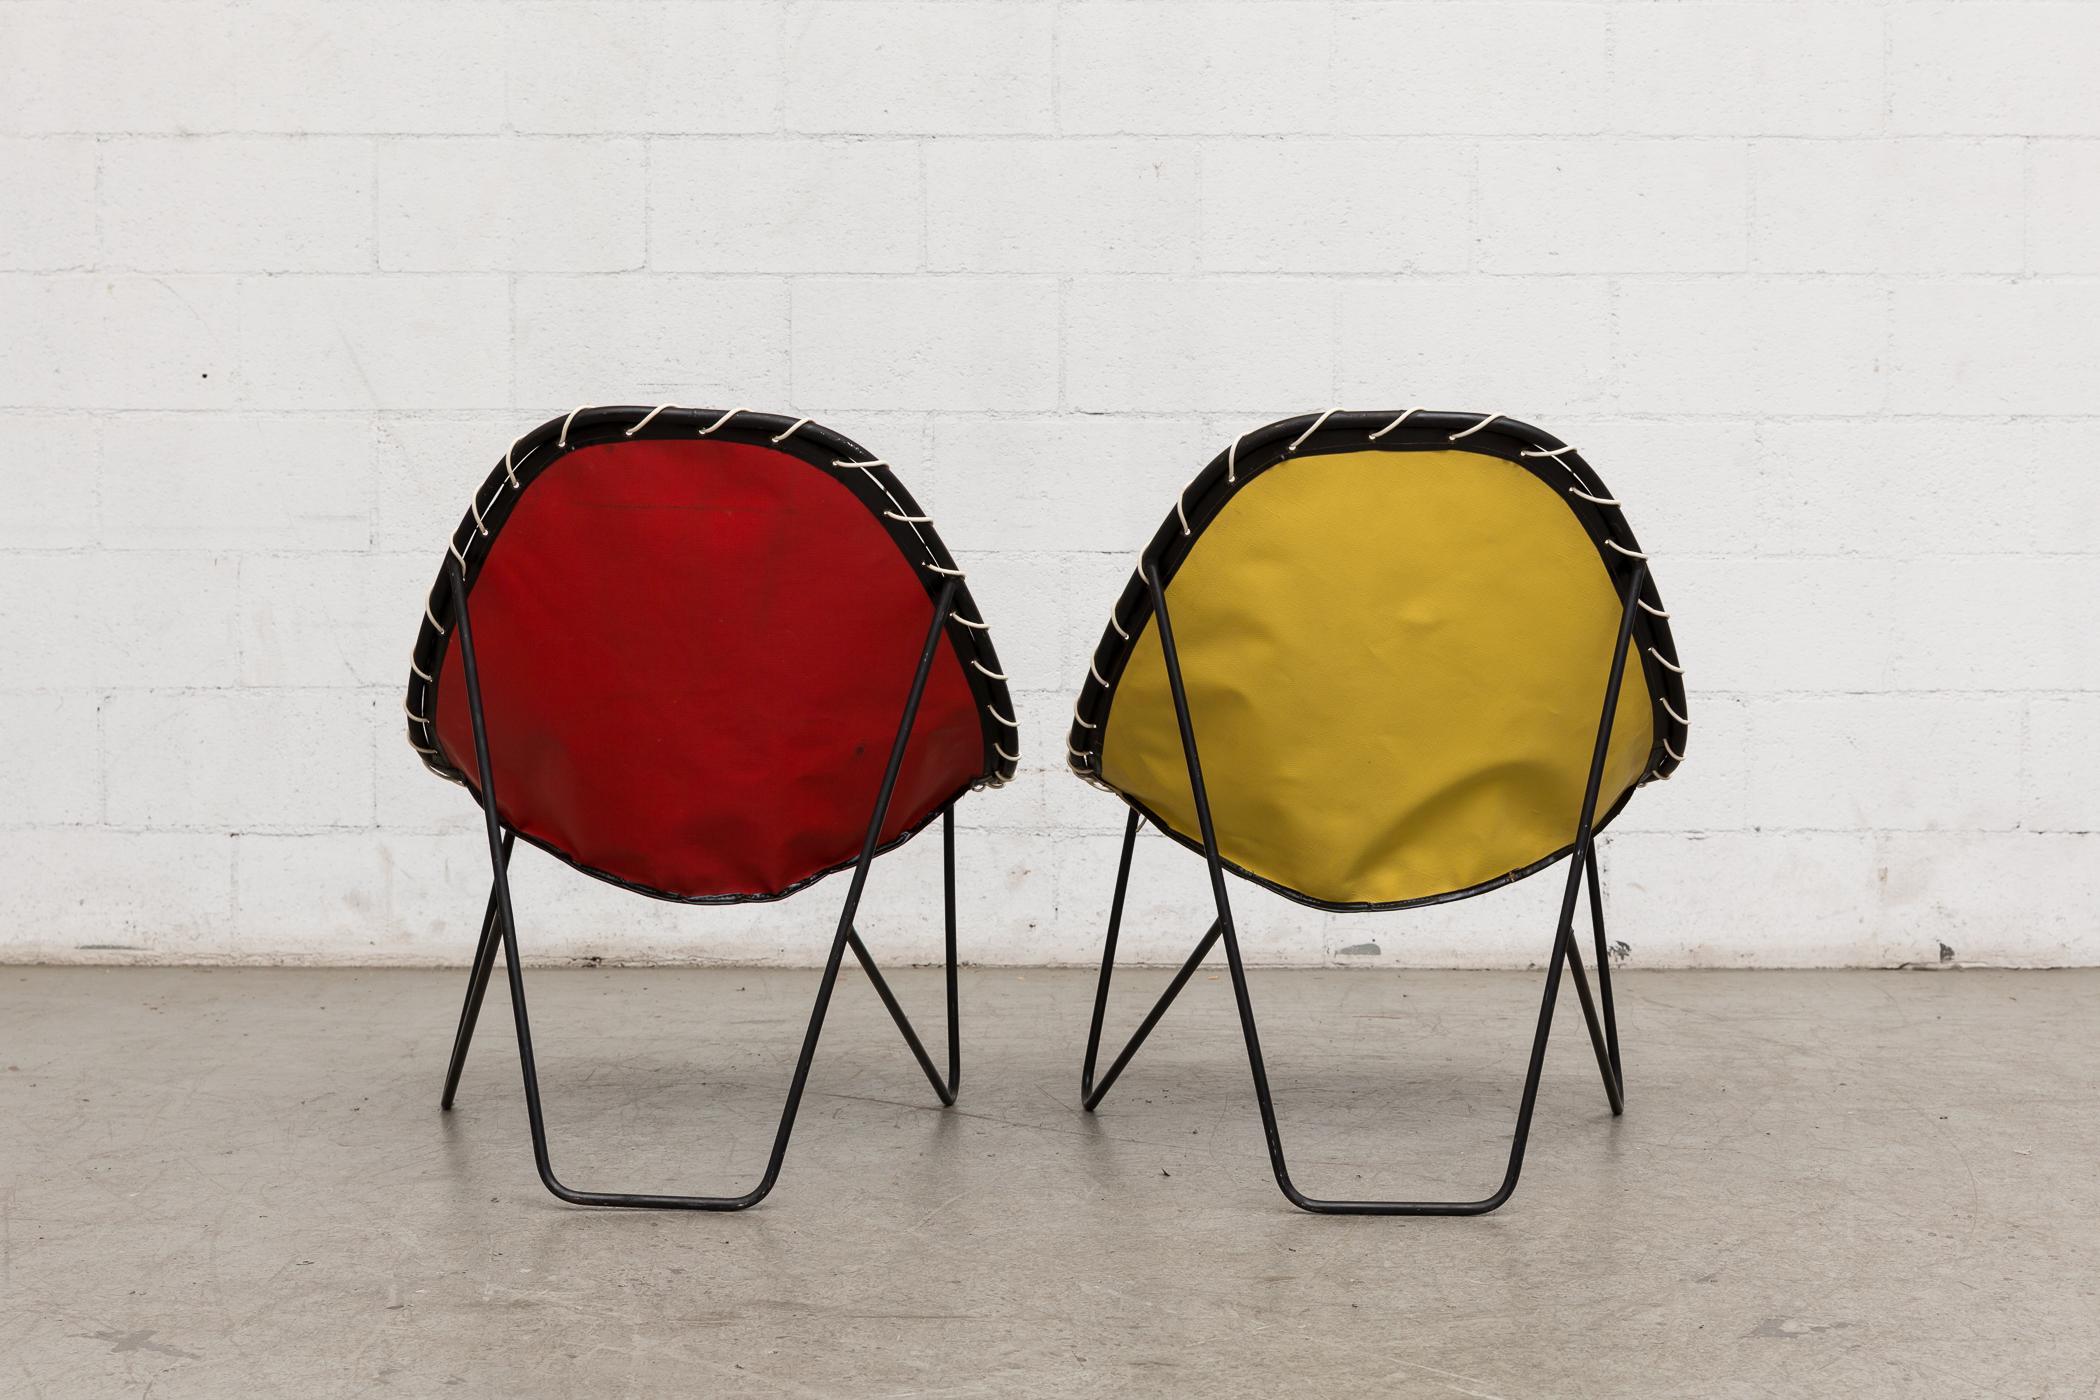 Mid-20th Century French Attributed Pair of Red & Yellow Retro Hoop Chairs with Black Wire Frames For Sale